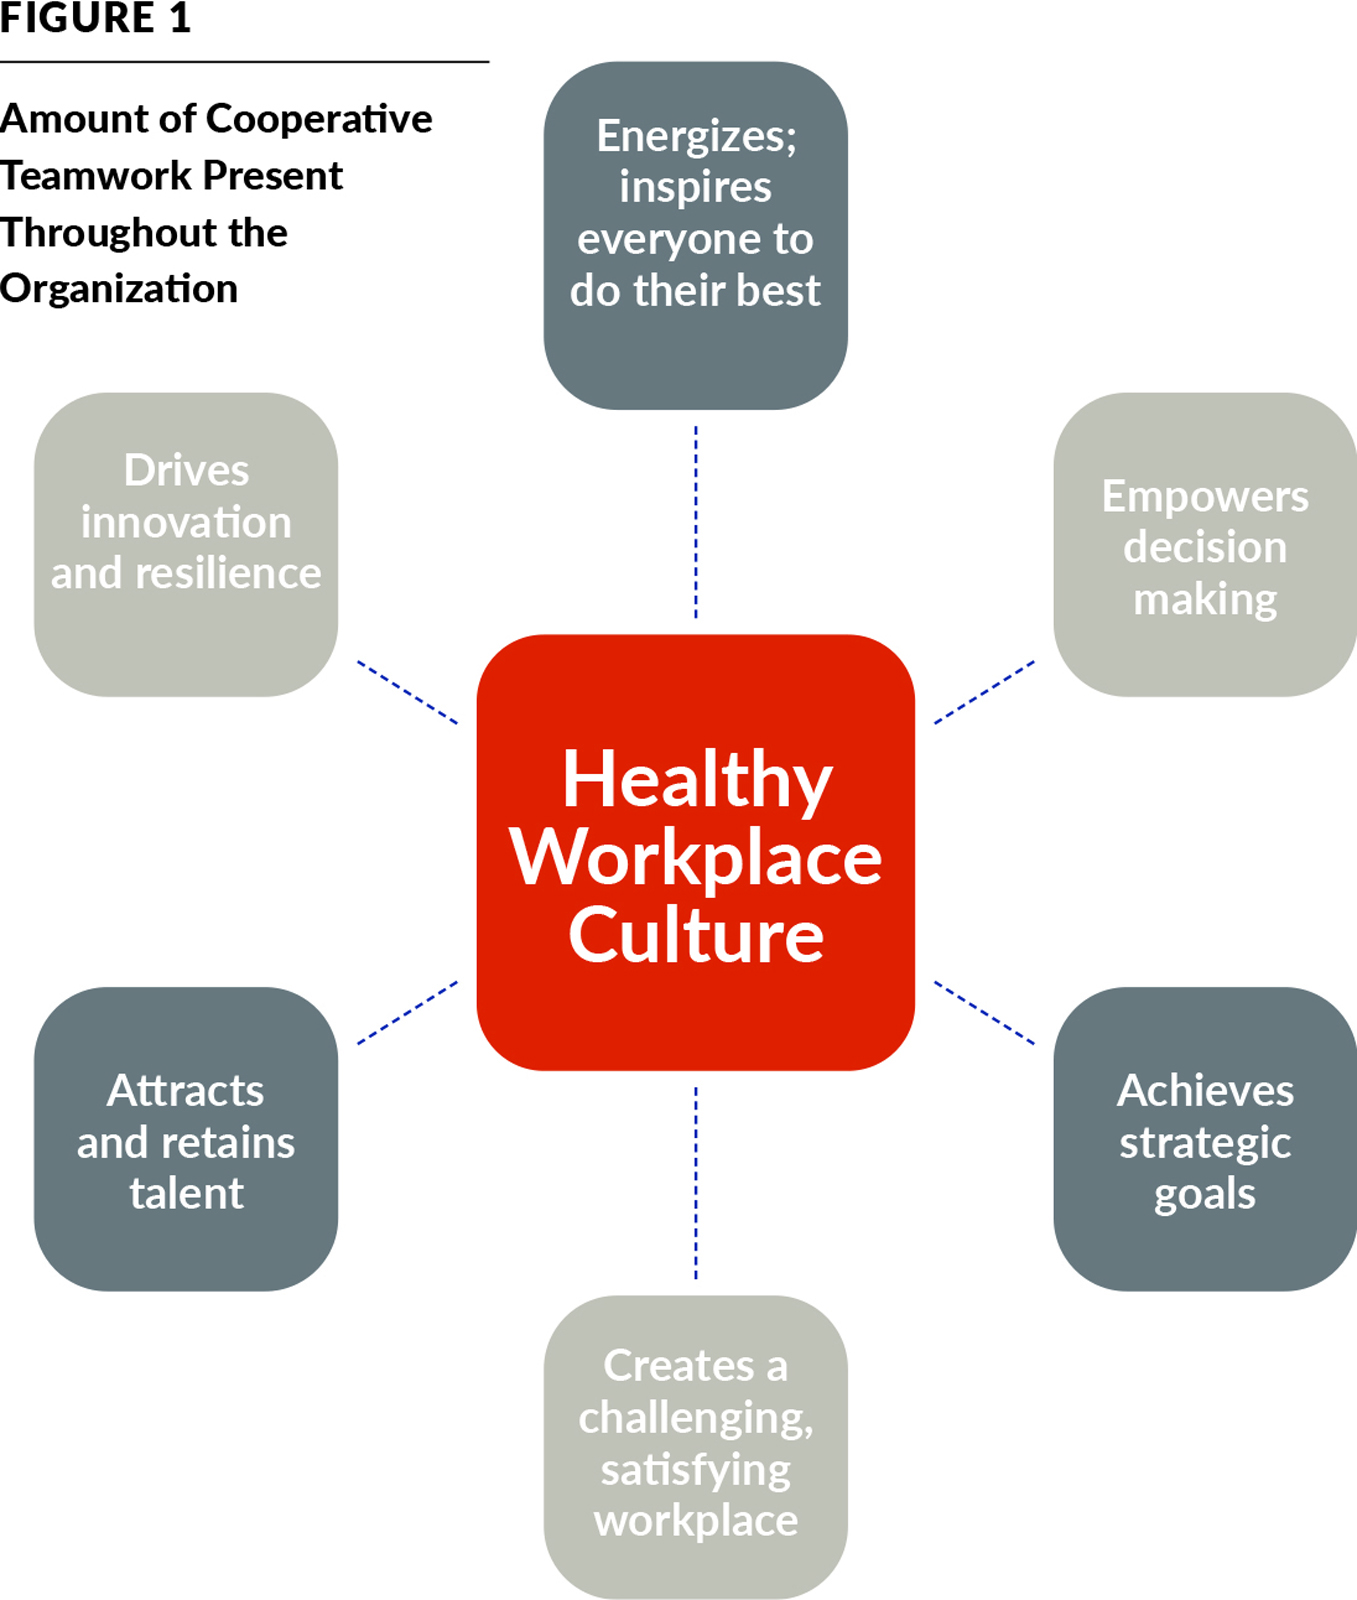 Figure depicting aspects of a healthy workplace culture